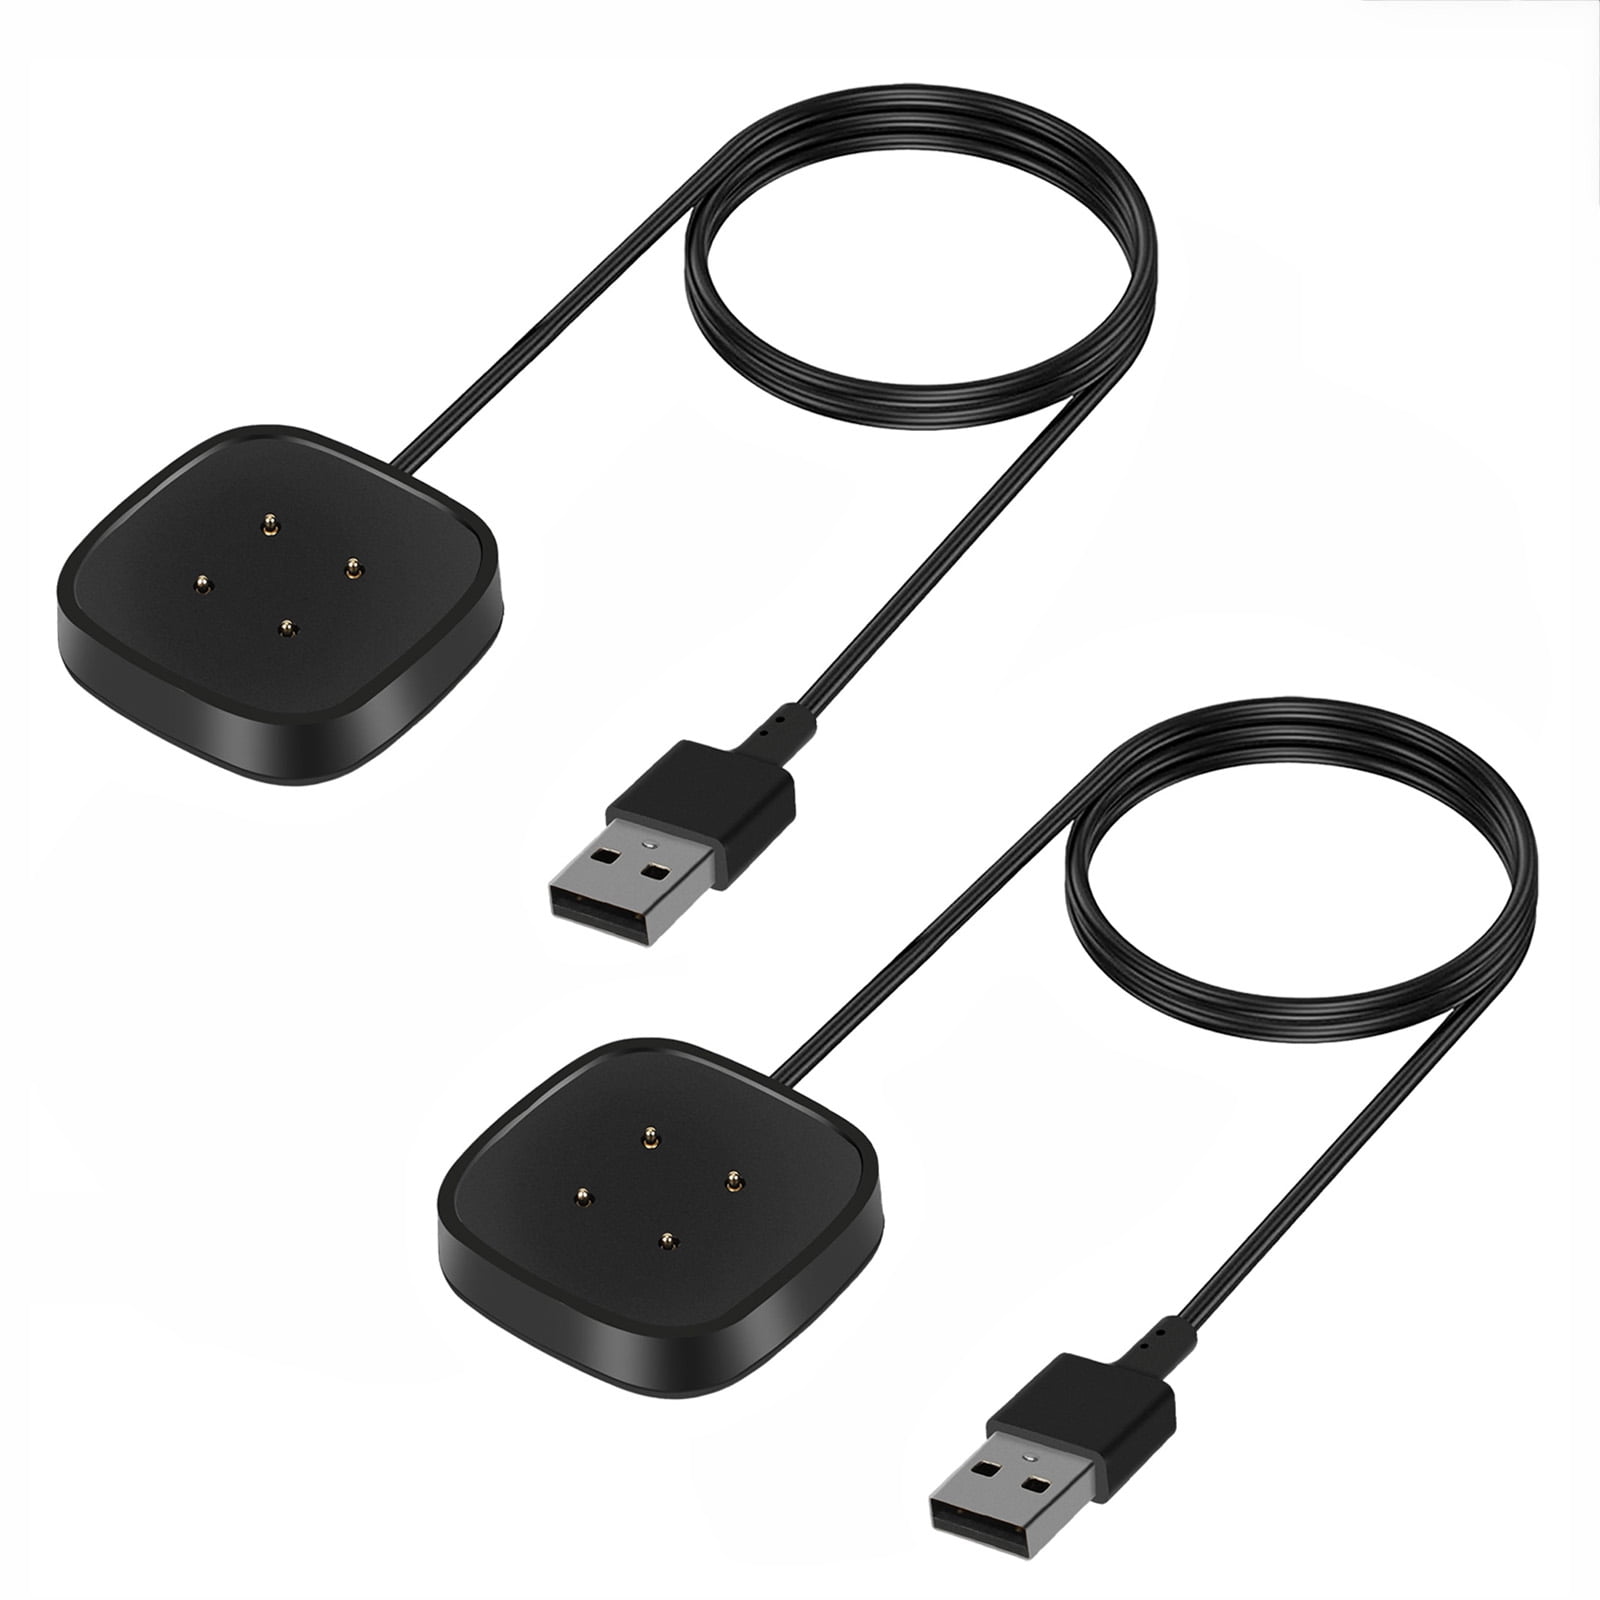 For Fitbit Versa 2 Smartwatch USB Charging Cable Replacement Charger Dock Cradle 